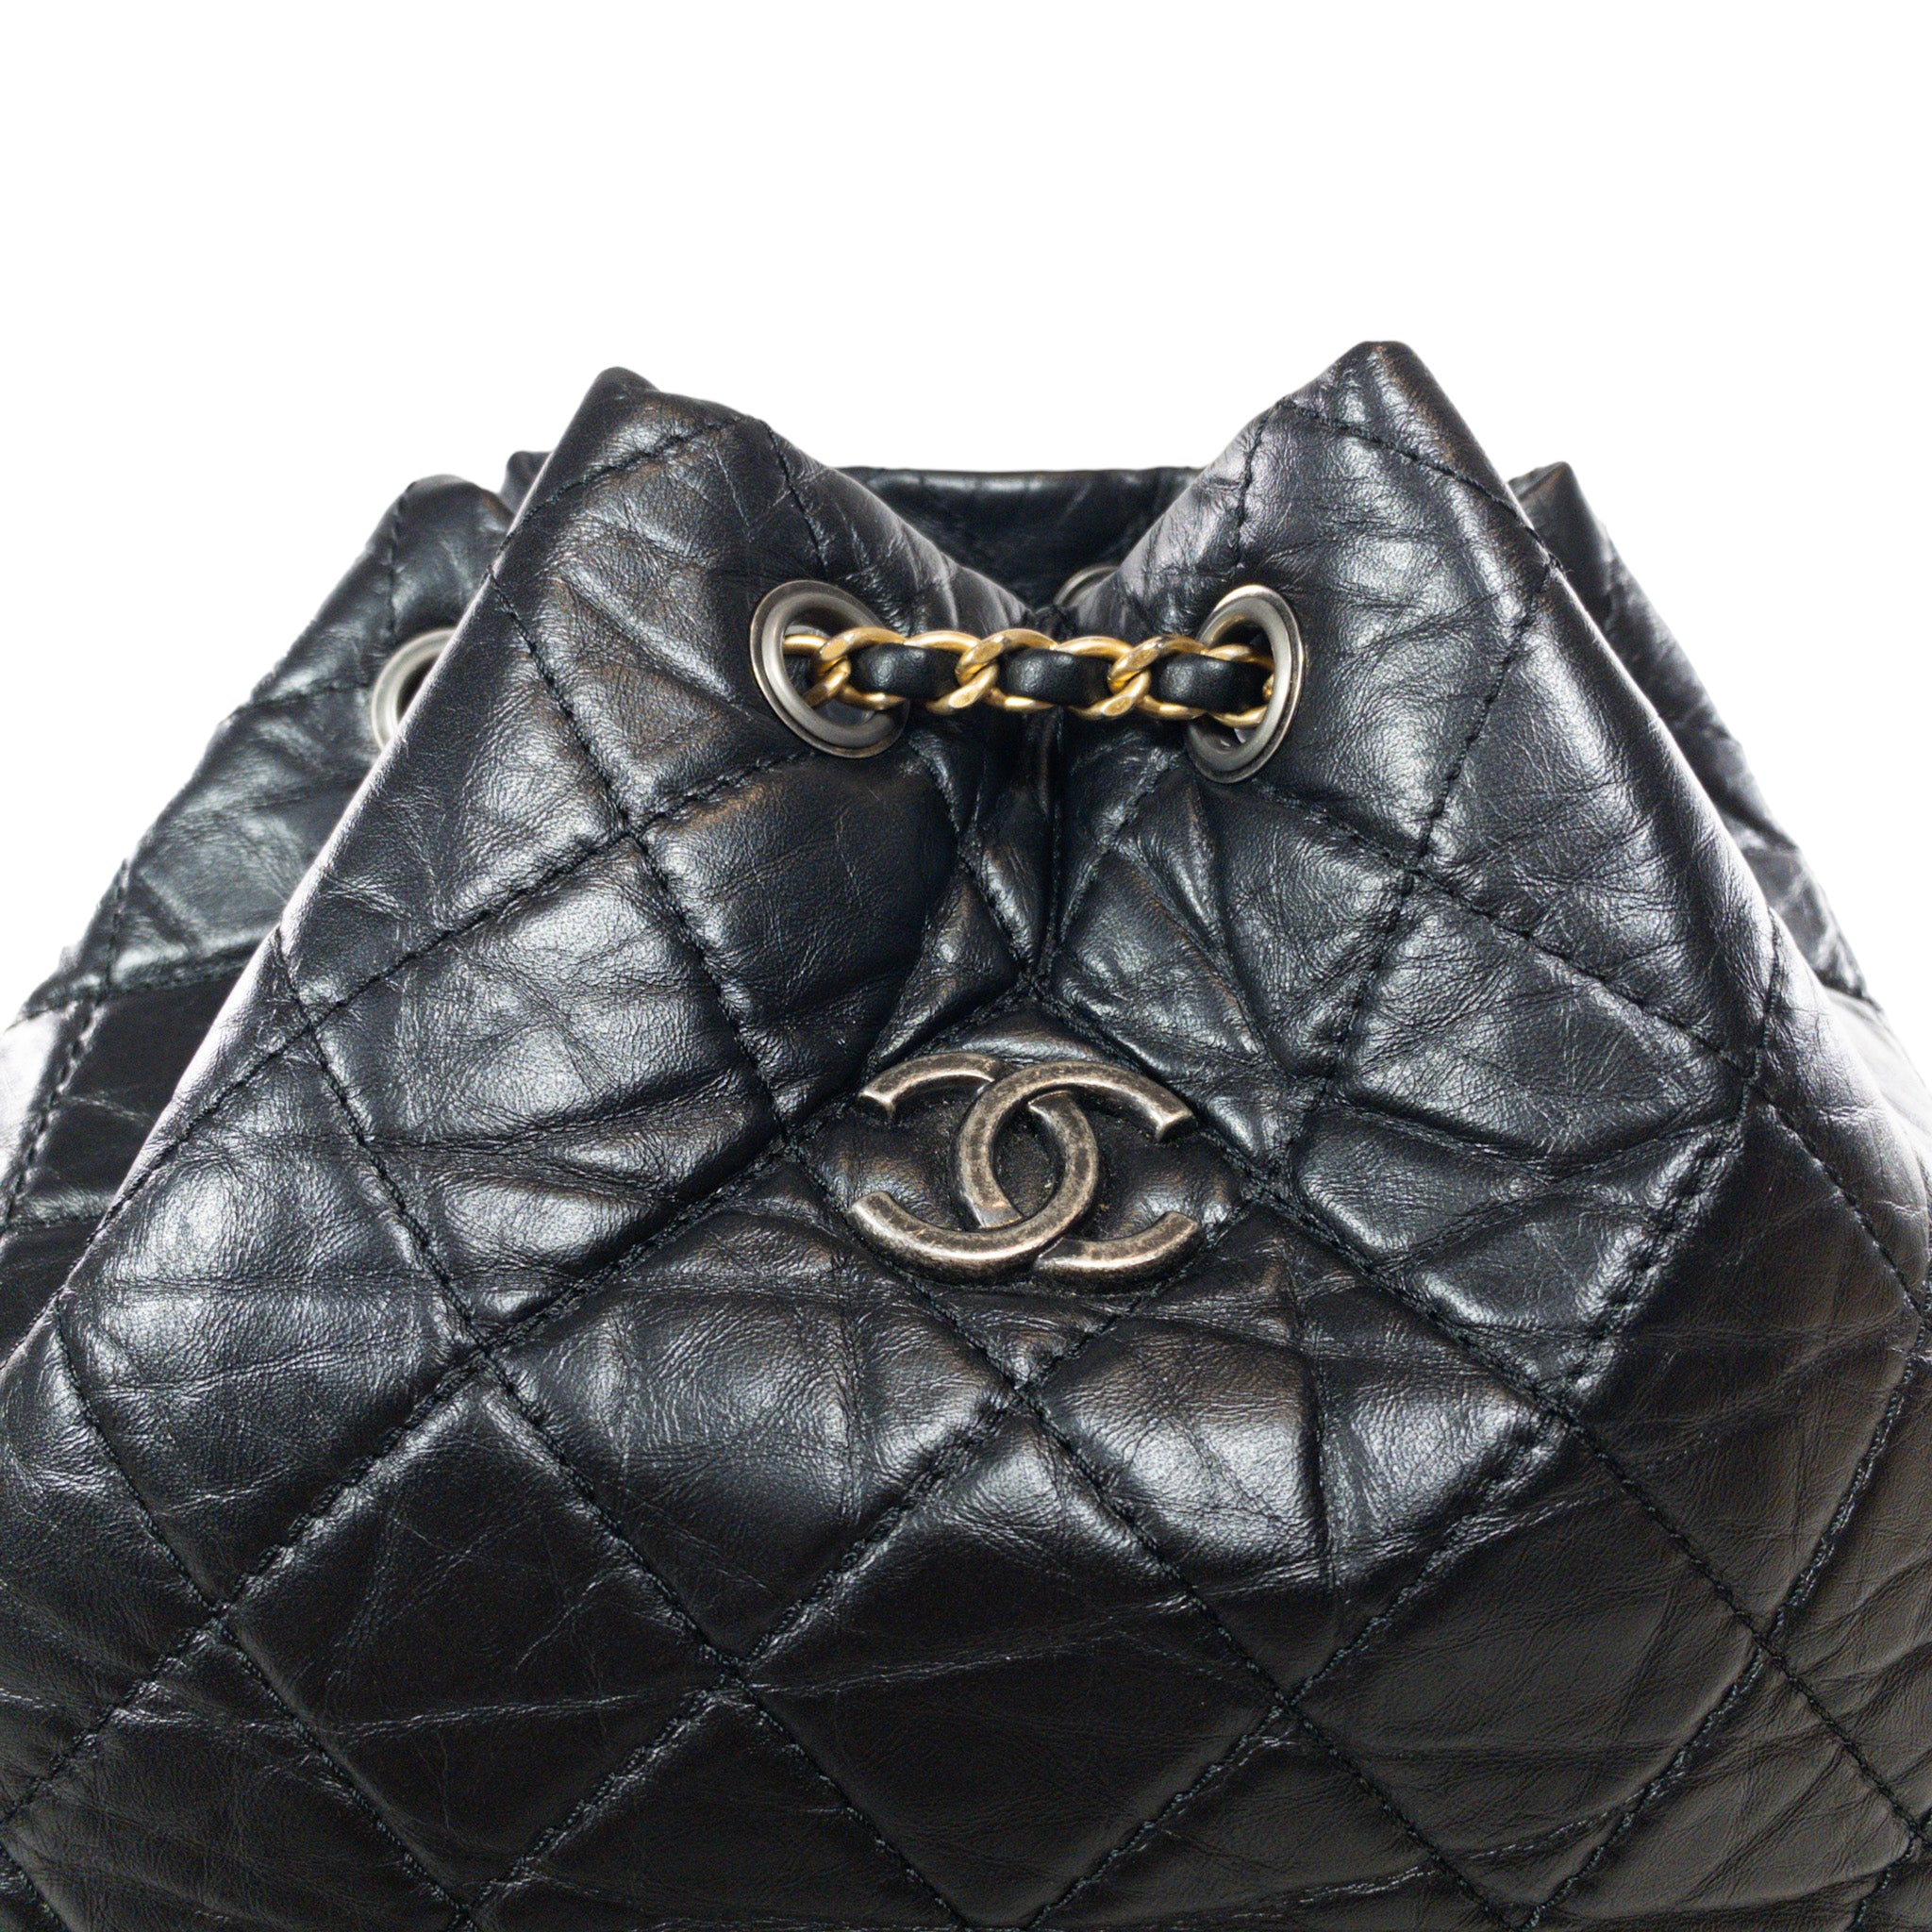 Chanel Gabrielle Backpack Quilted Calfskin Small Black 5834217